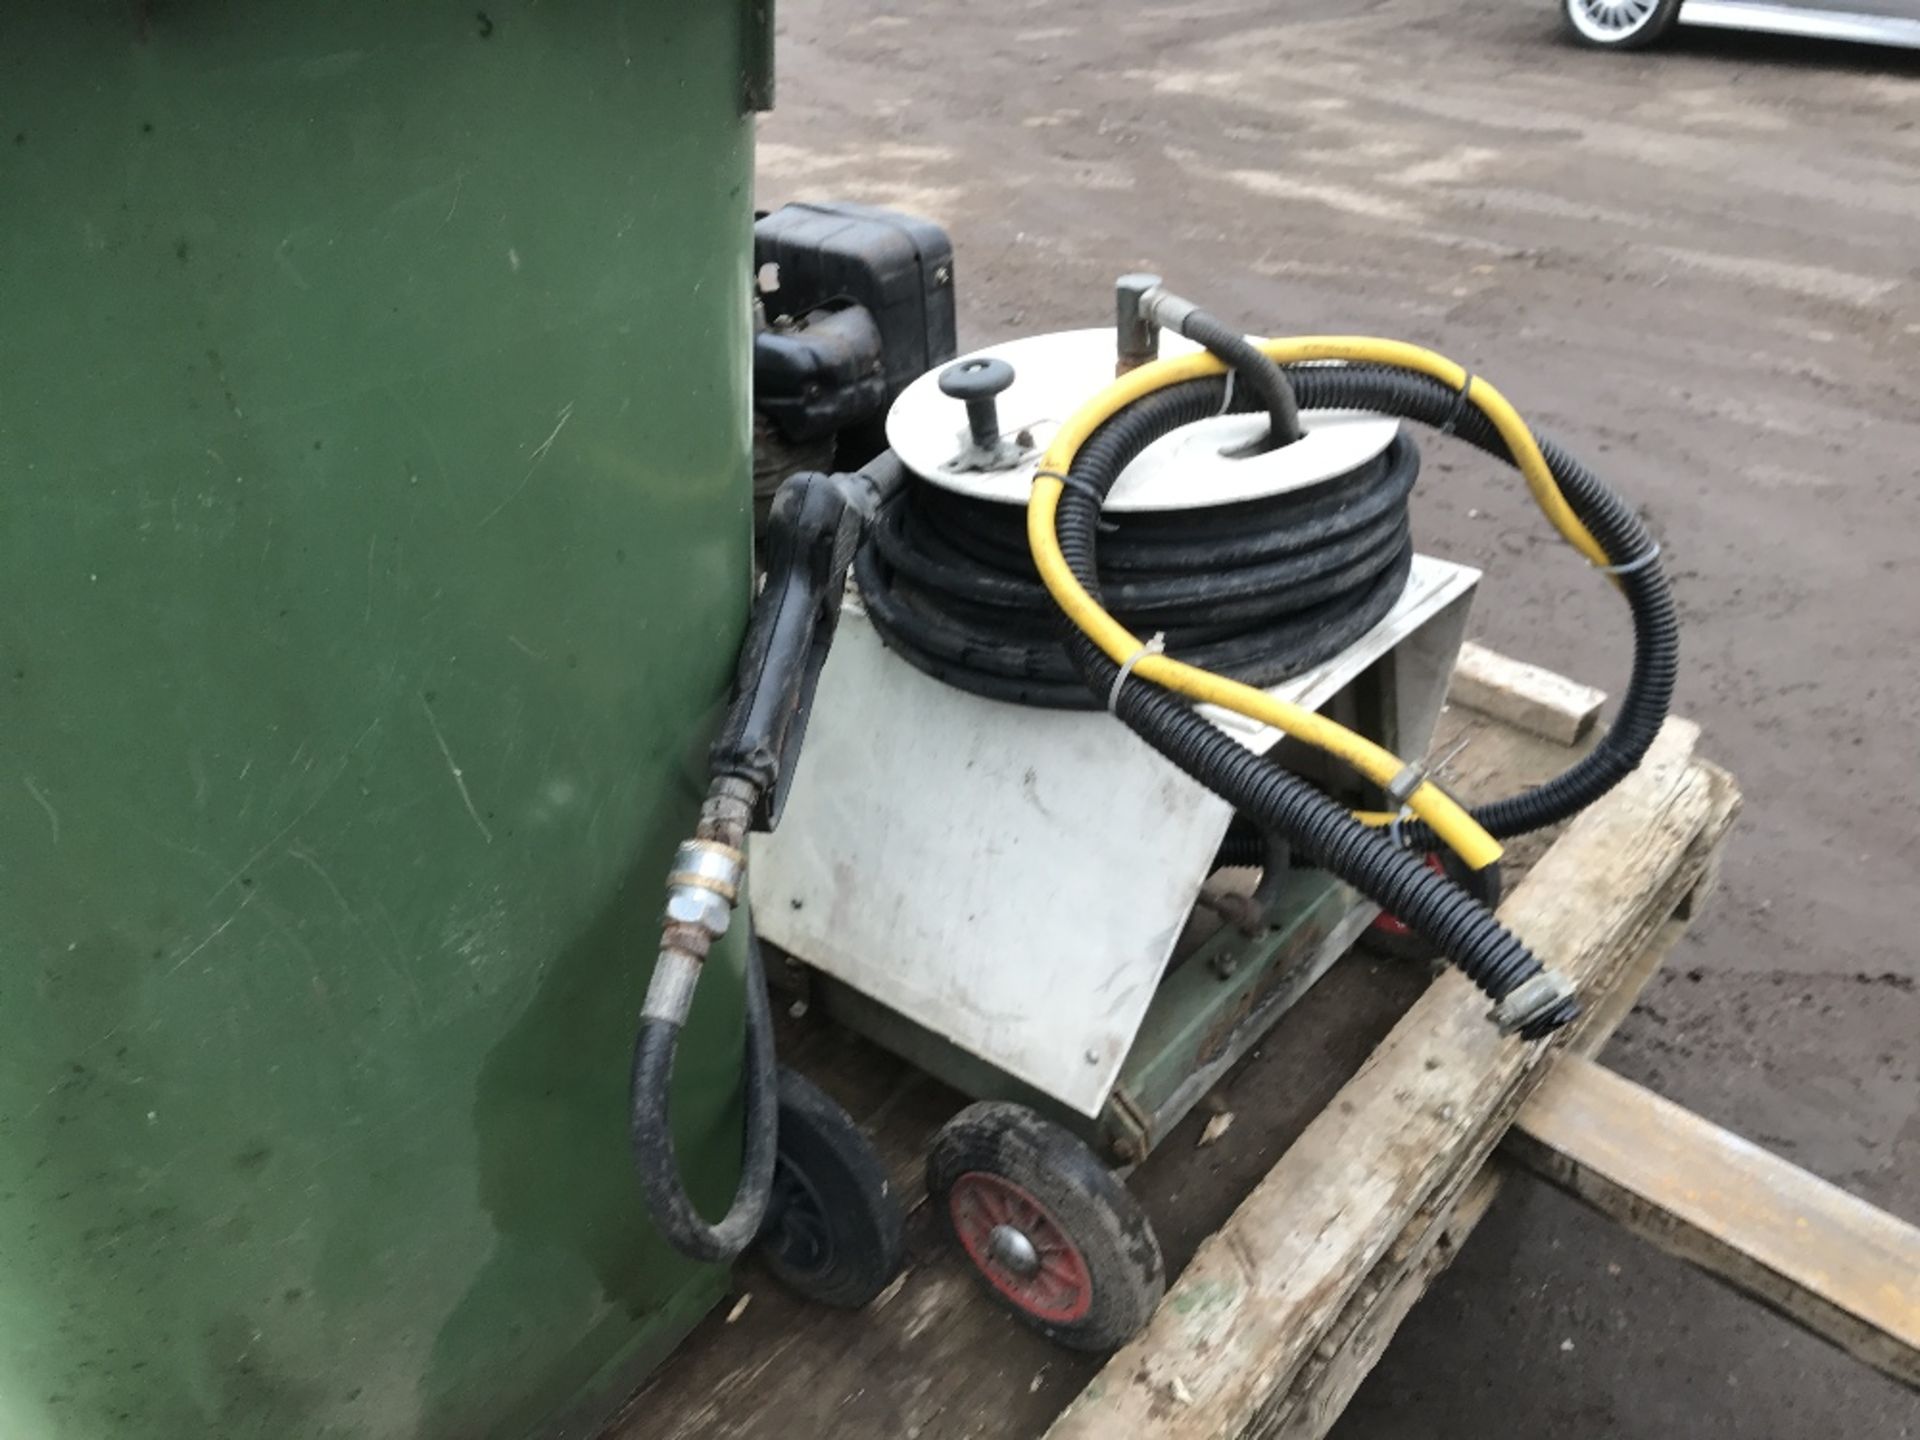 HONDA ENGINED BRENDON DIESEL POWER WASHER C/W HOSE, LANCE AND RESERVOIR TANK. WHEN TESTED WAS SEEN - Image 3 of 5